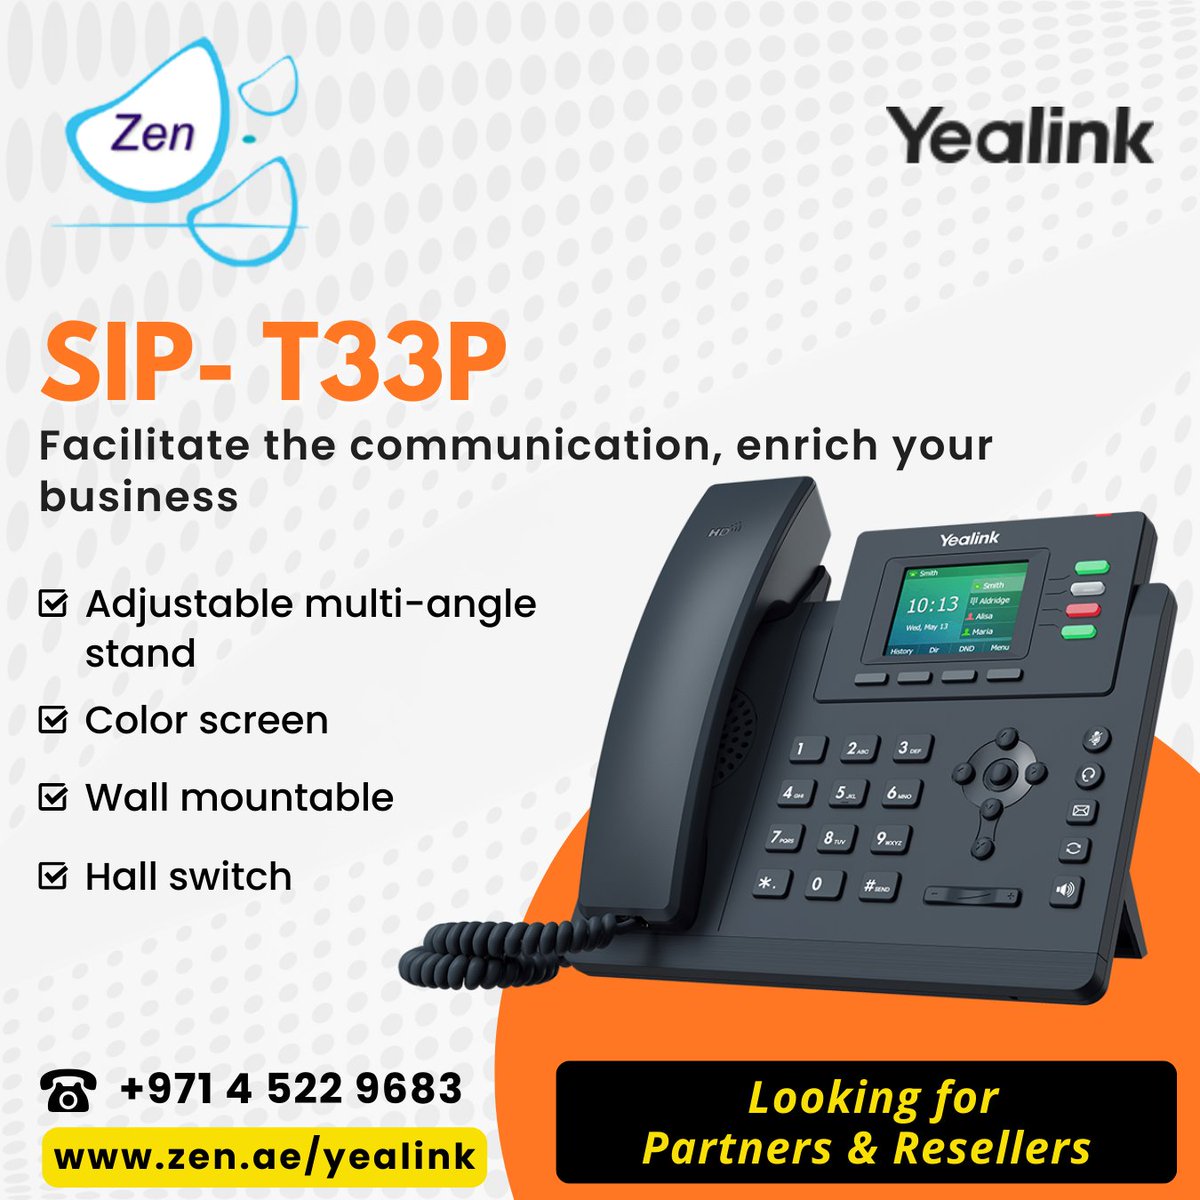 #yealink  SIP- T33P
Facilitate the communication, enrich your business
Looking for partners & resellers.

smpl.is/8l141

#3cx #zenitdxb #zenit #businesscommunication #dubaistartup #3cxhosting #simhosting #saudistartups